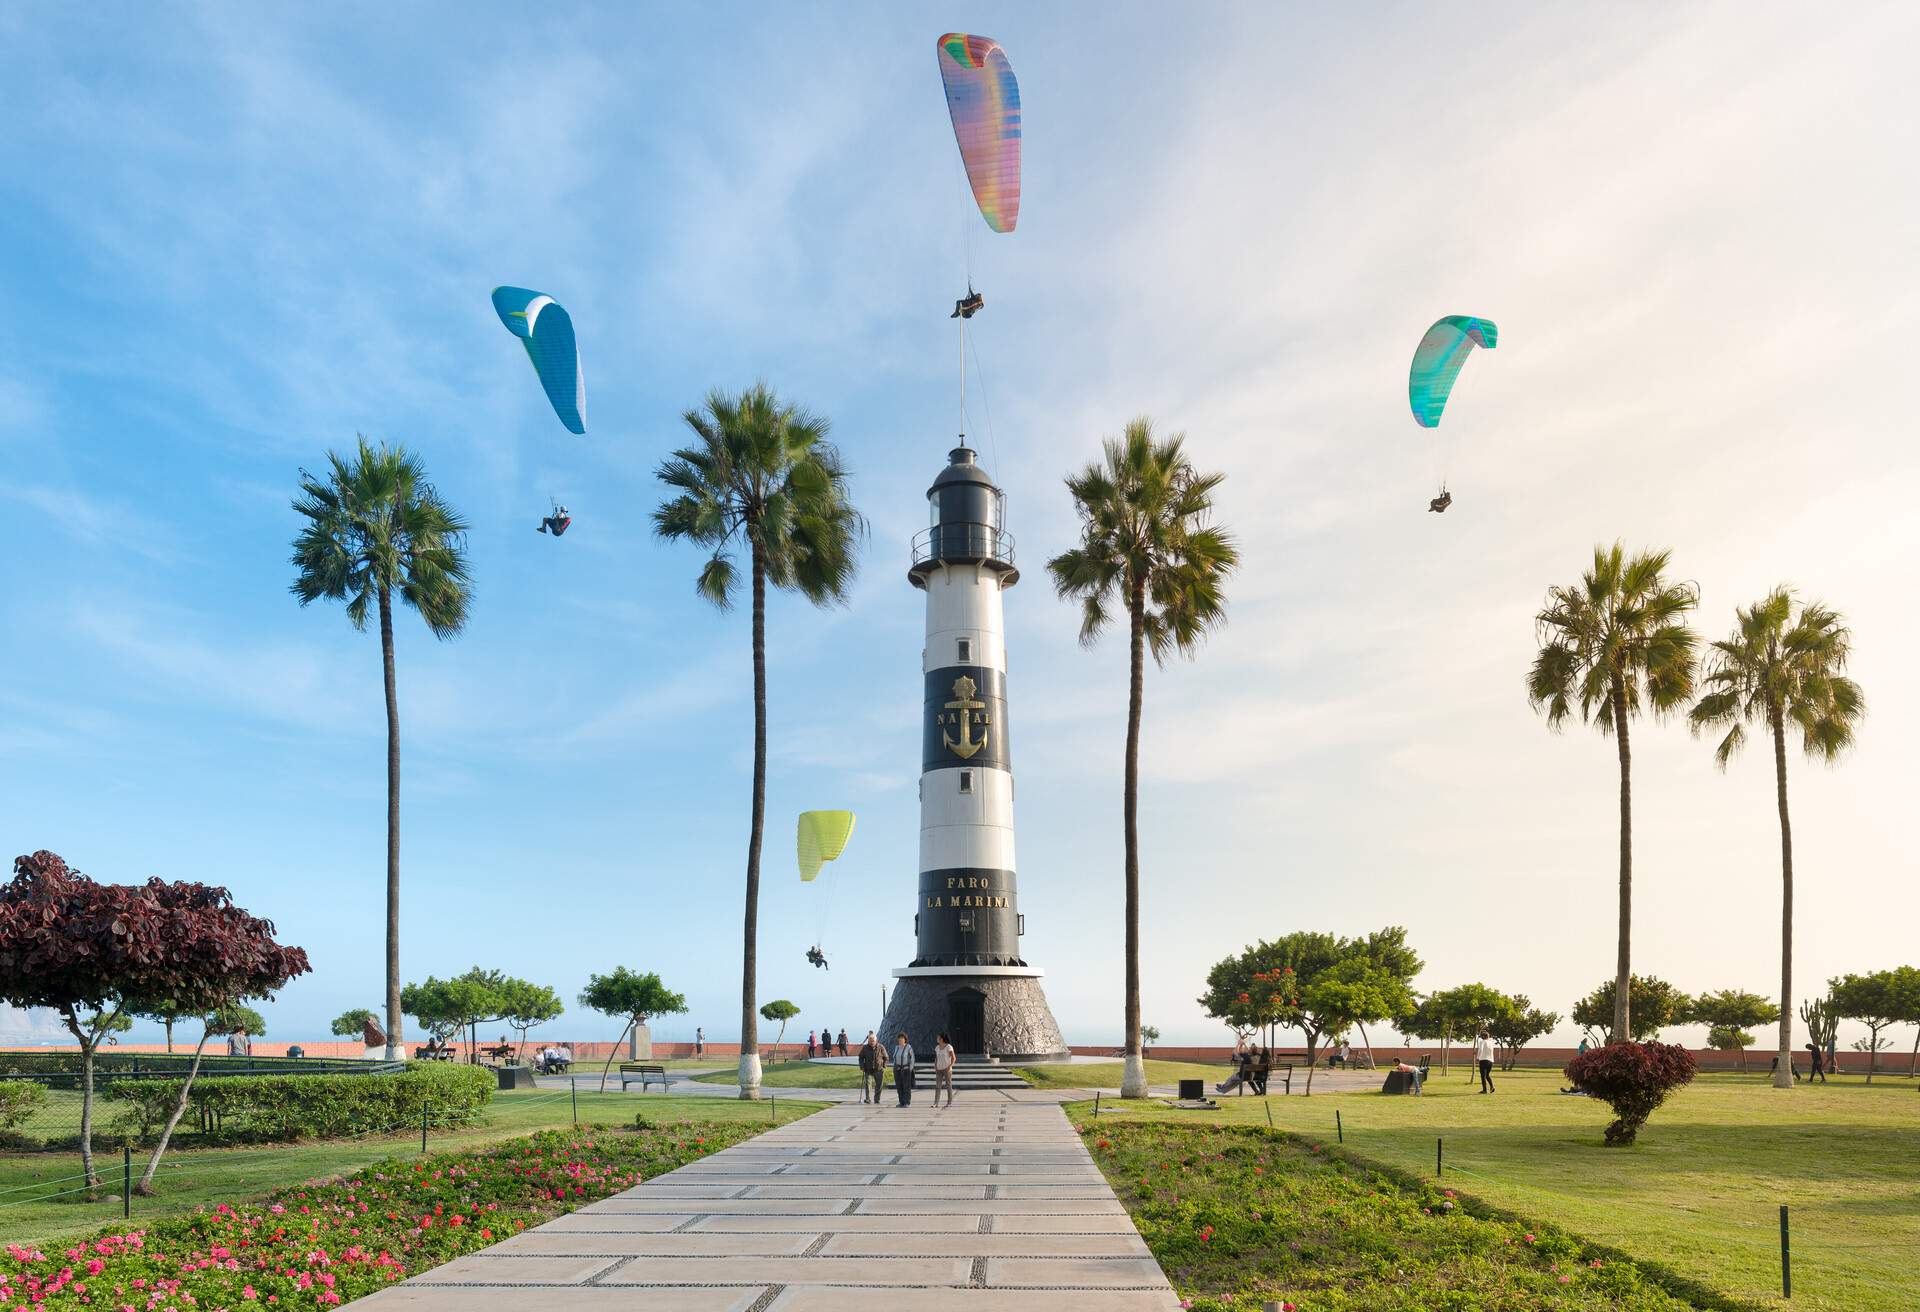 The Miraflores Lighthouse stands proudly at the heart of a coastal park, where towering palms dot the landscape, people meander along green turf, and paragliders gracefully soar above in the backdrop.